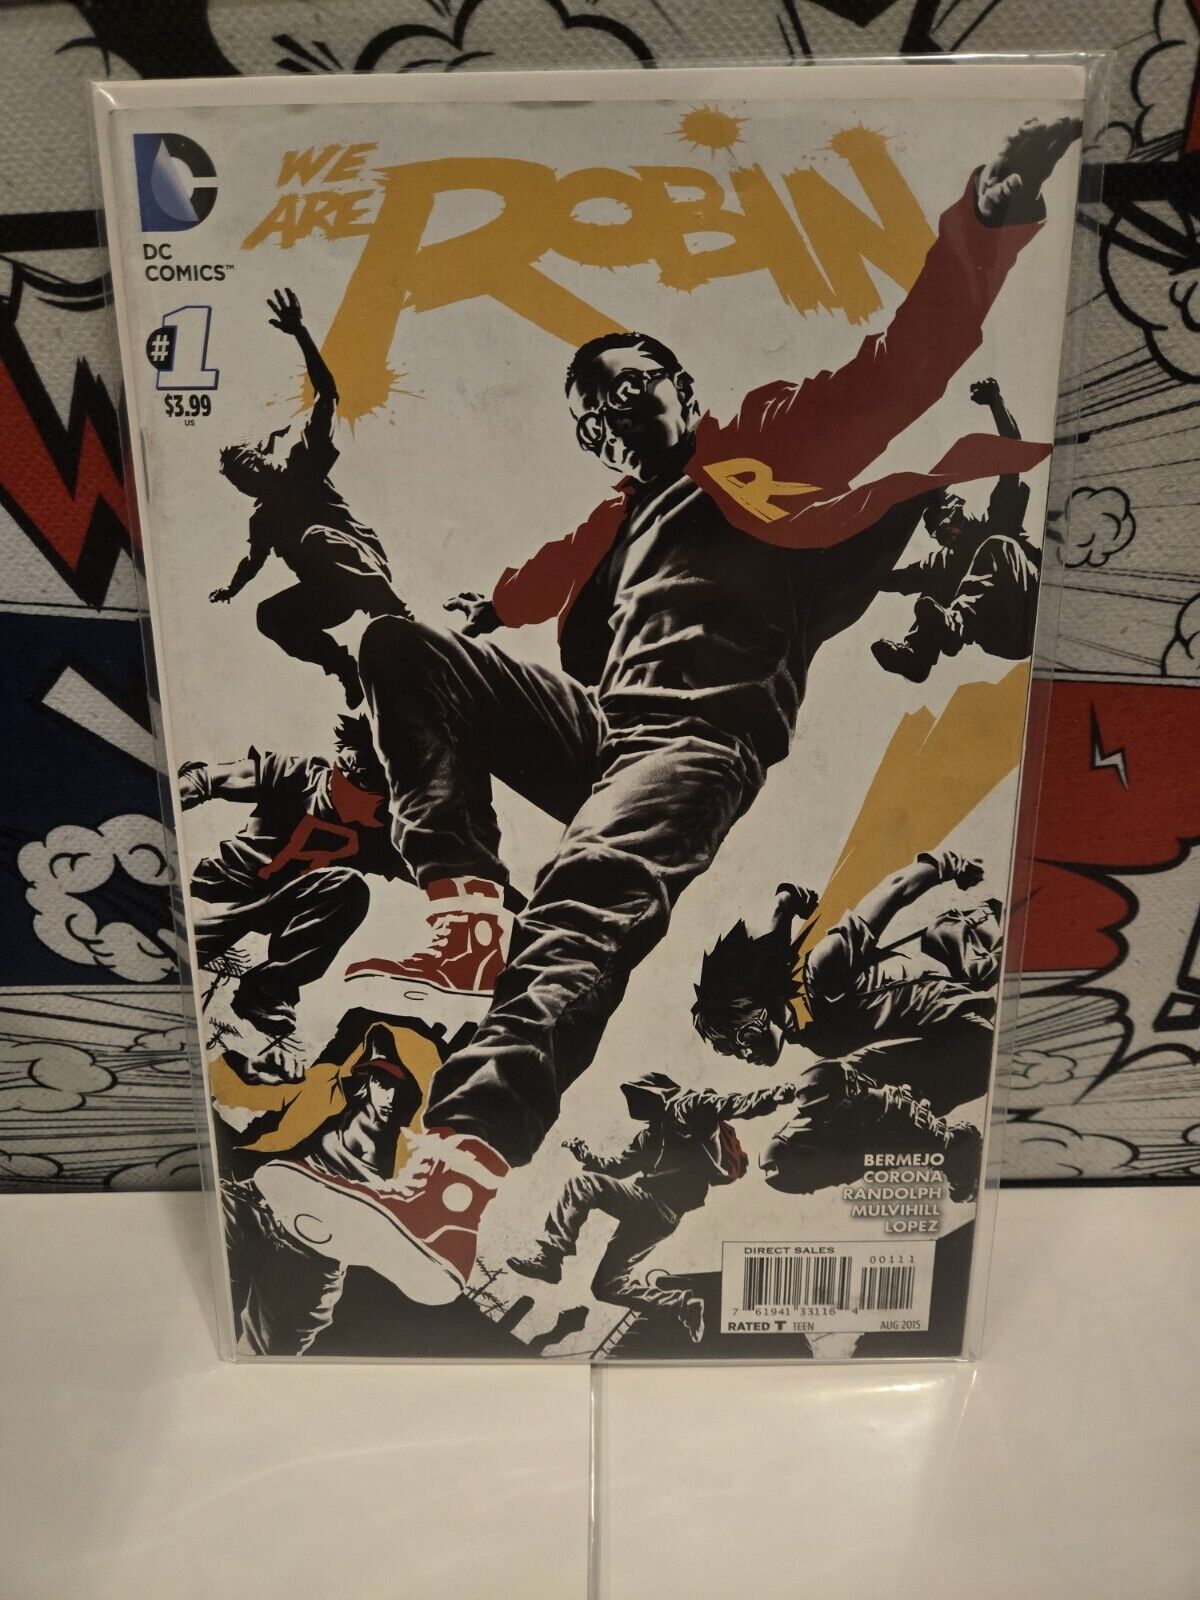 We Are Robin #1 (DC Comics August 2015)